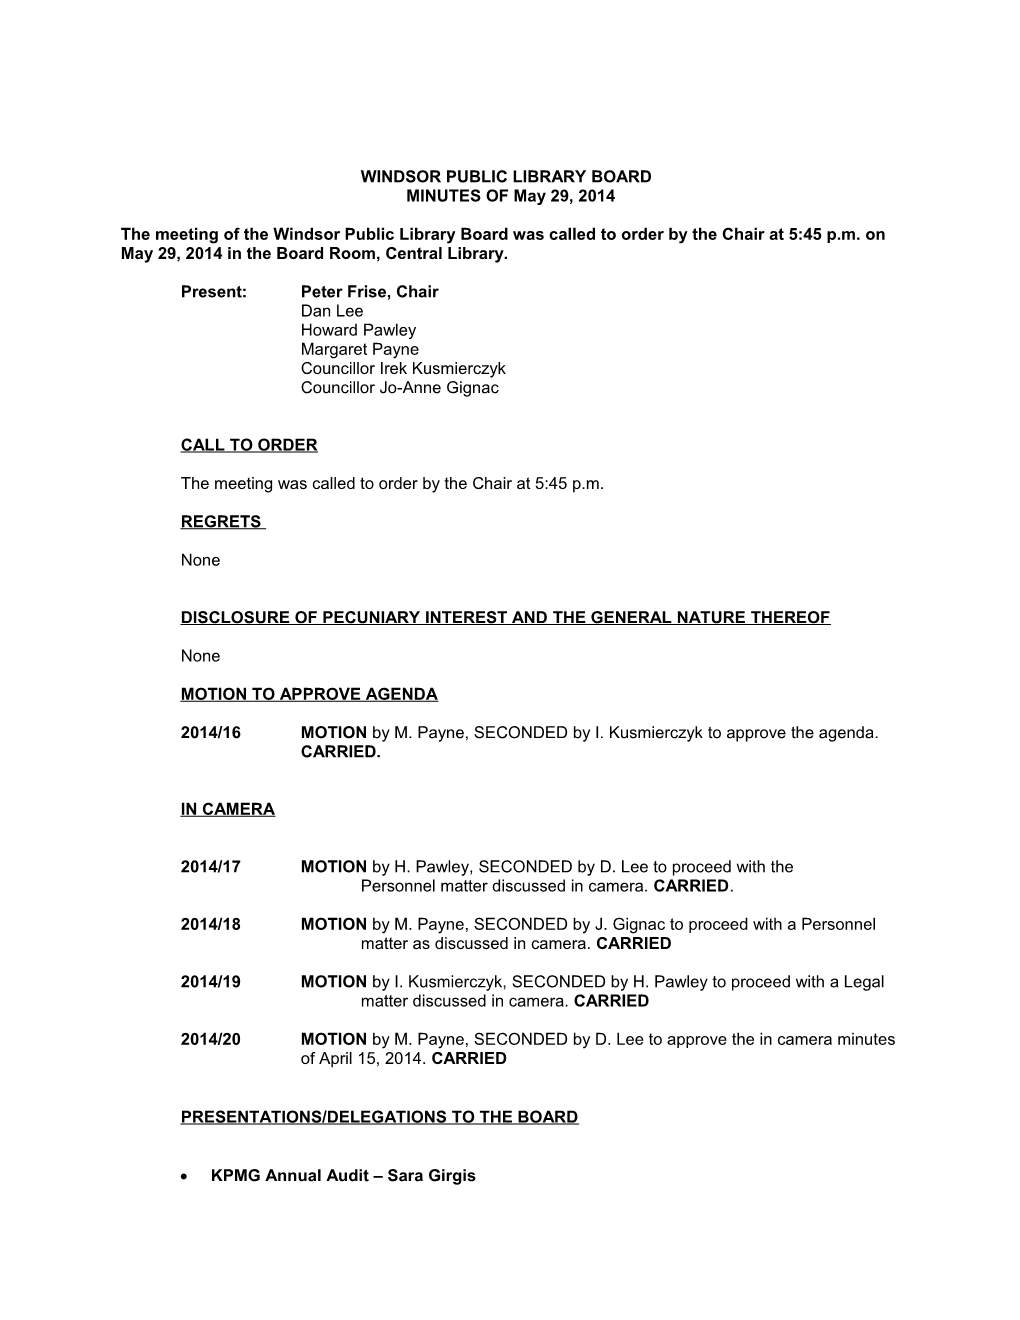 Windsor Public Library Board Meeting Minutes May 29, 2014